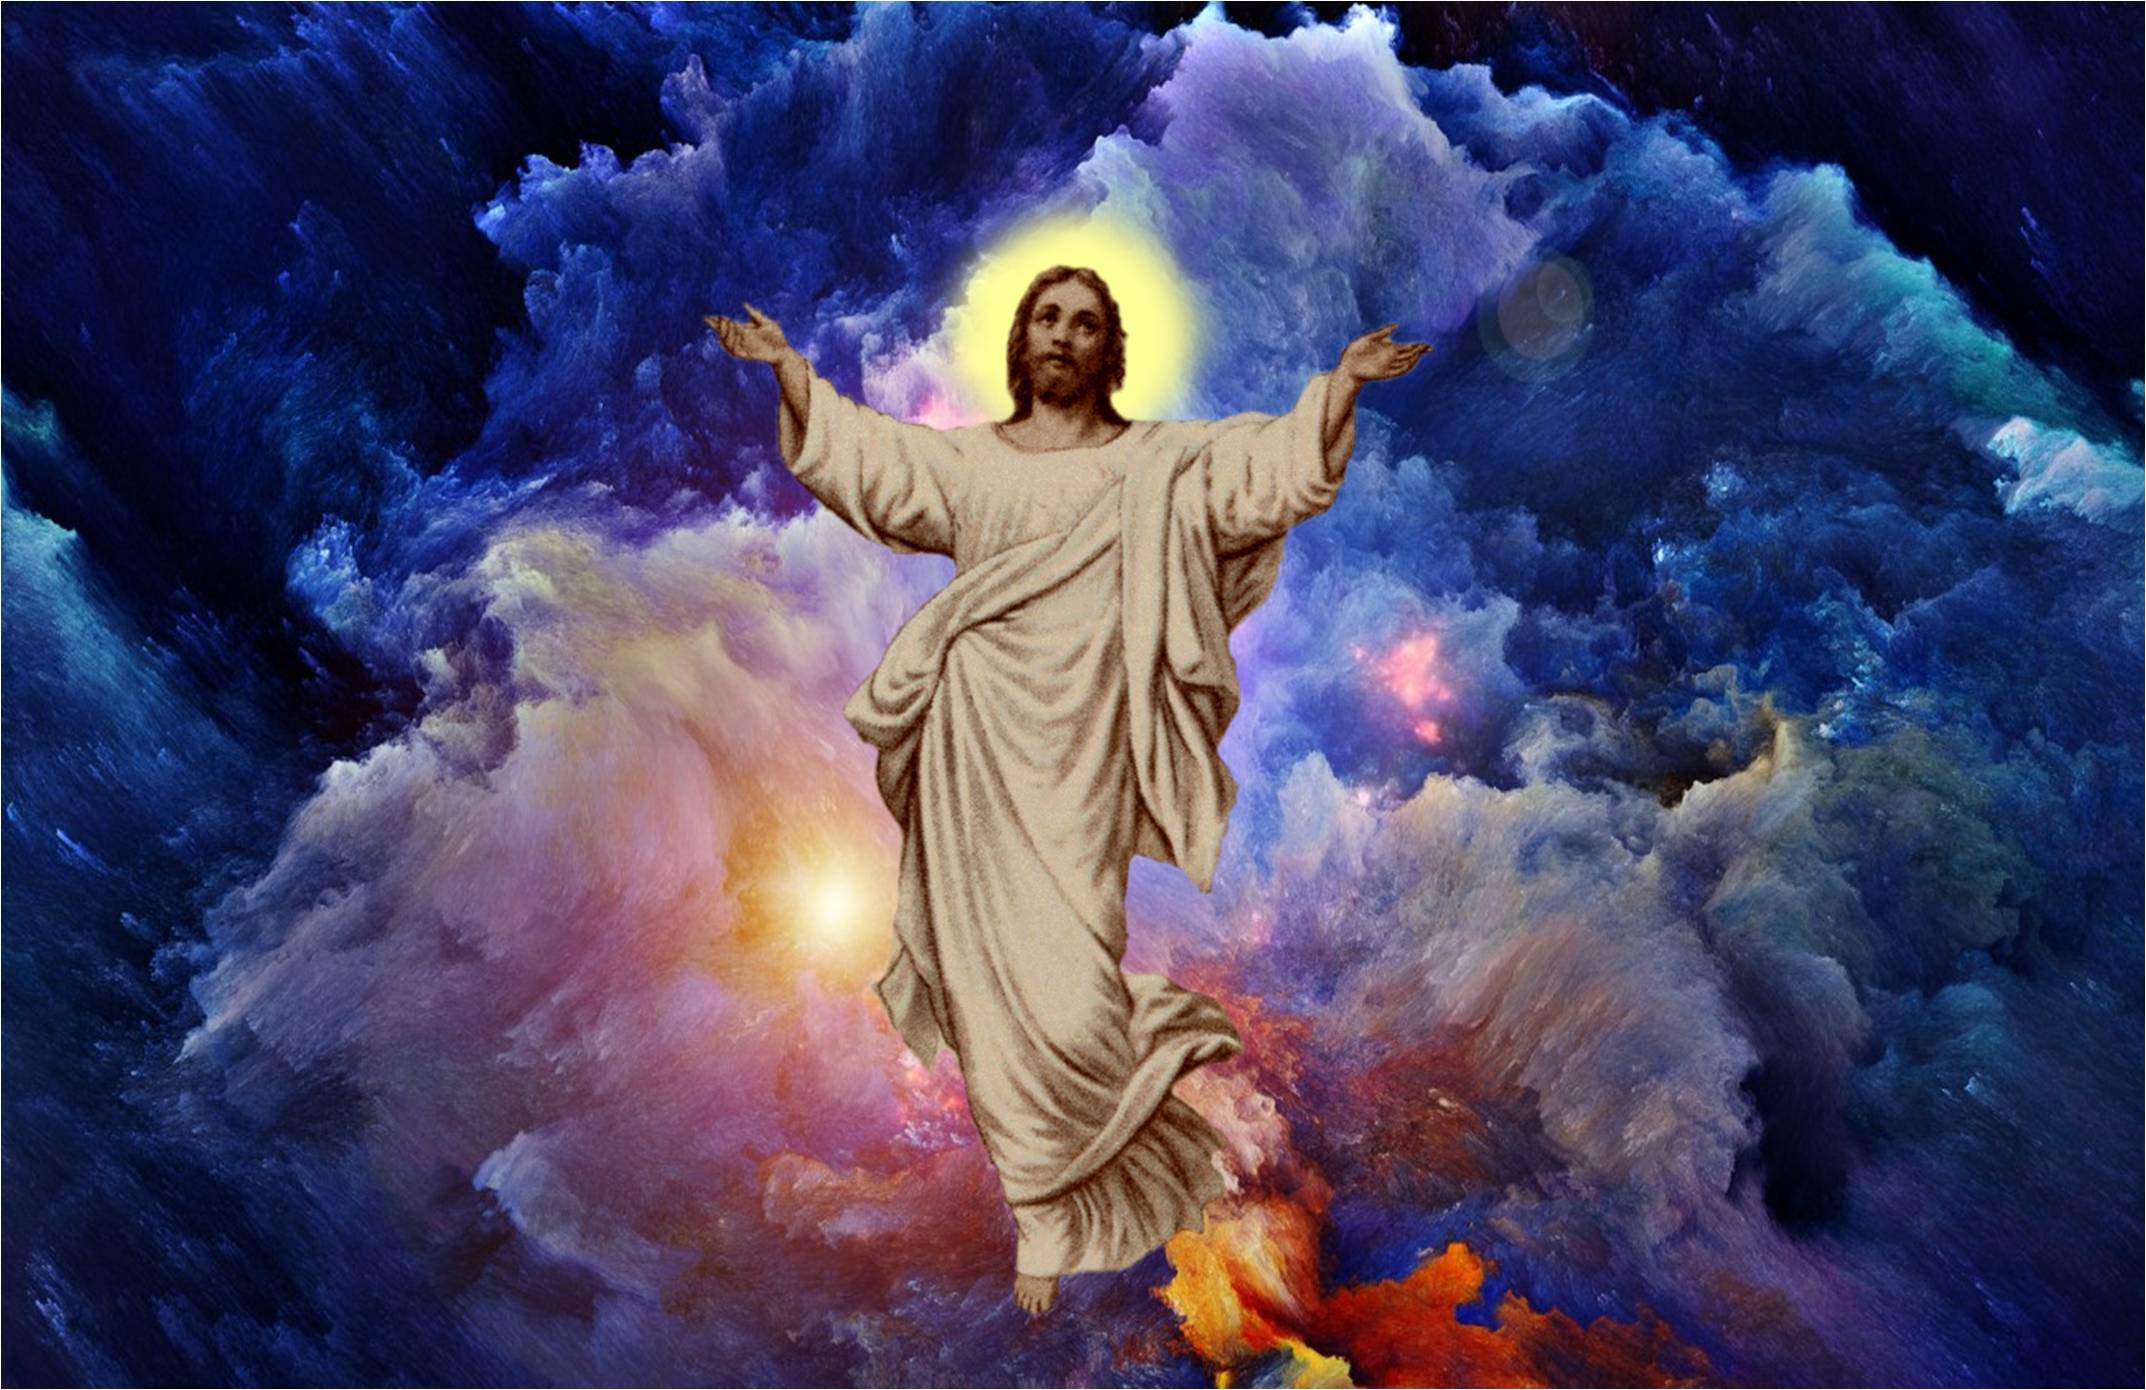 In High Quality: Jesus HD by Chauncey Praylow, 11.09.15